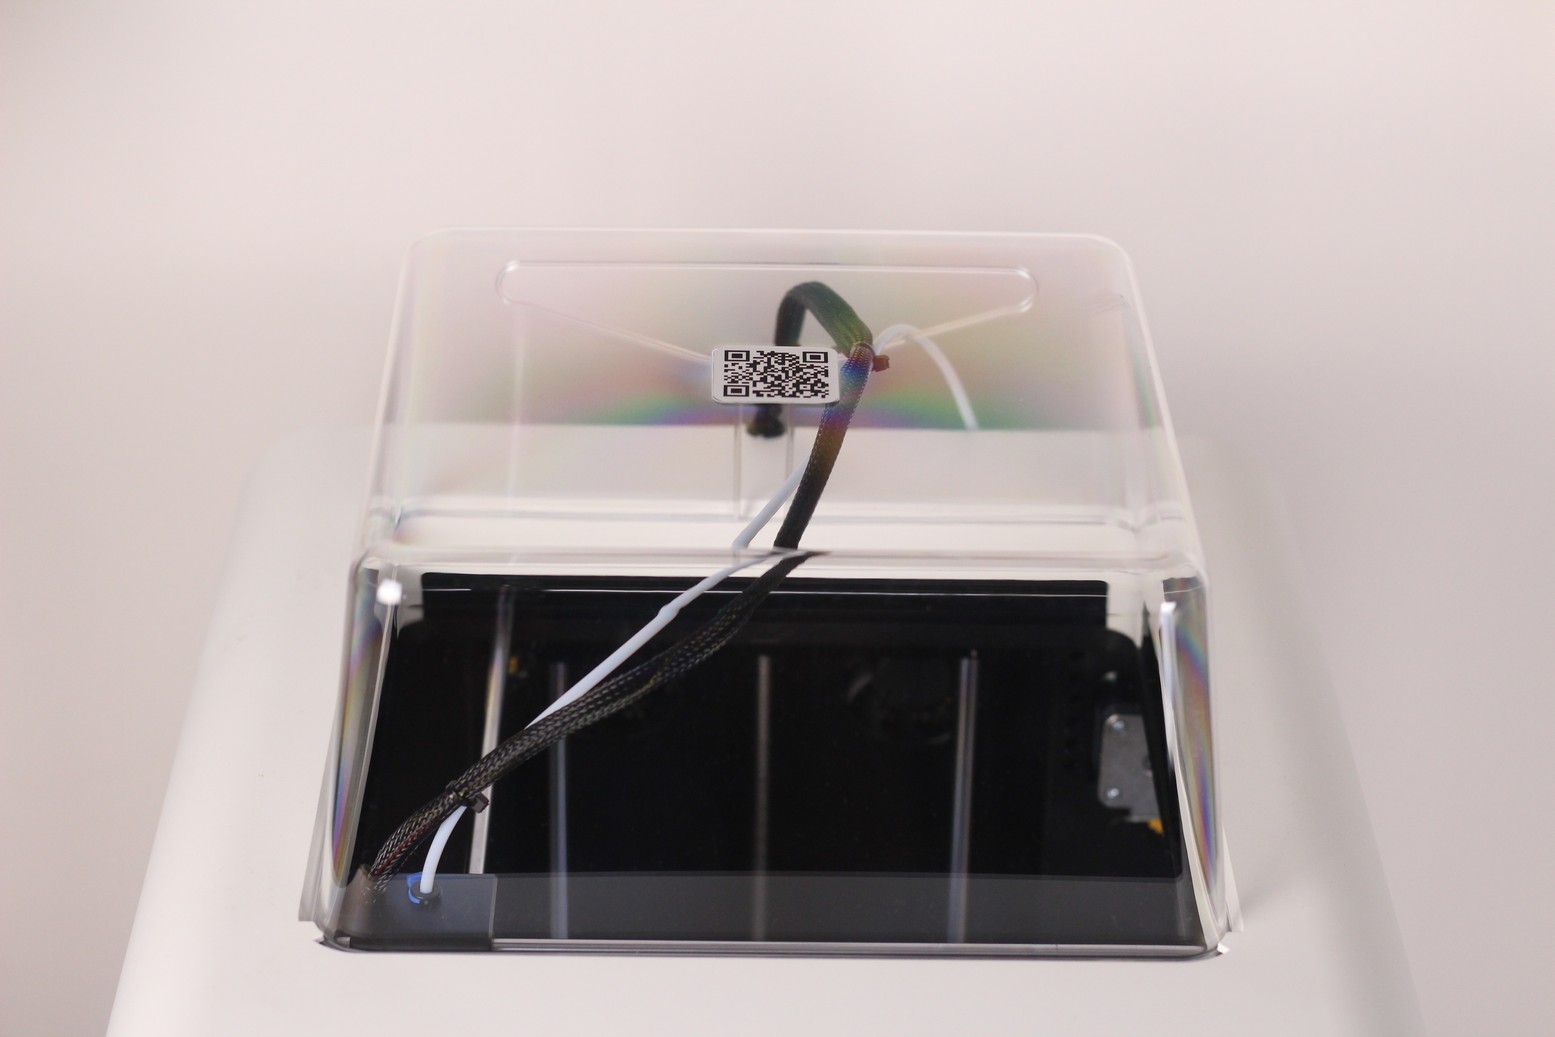 Creality CR 200D top cover | Creality CR-200B Review: Budget Enclosed 3D Printer